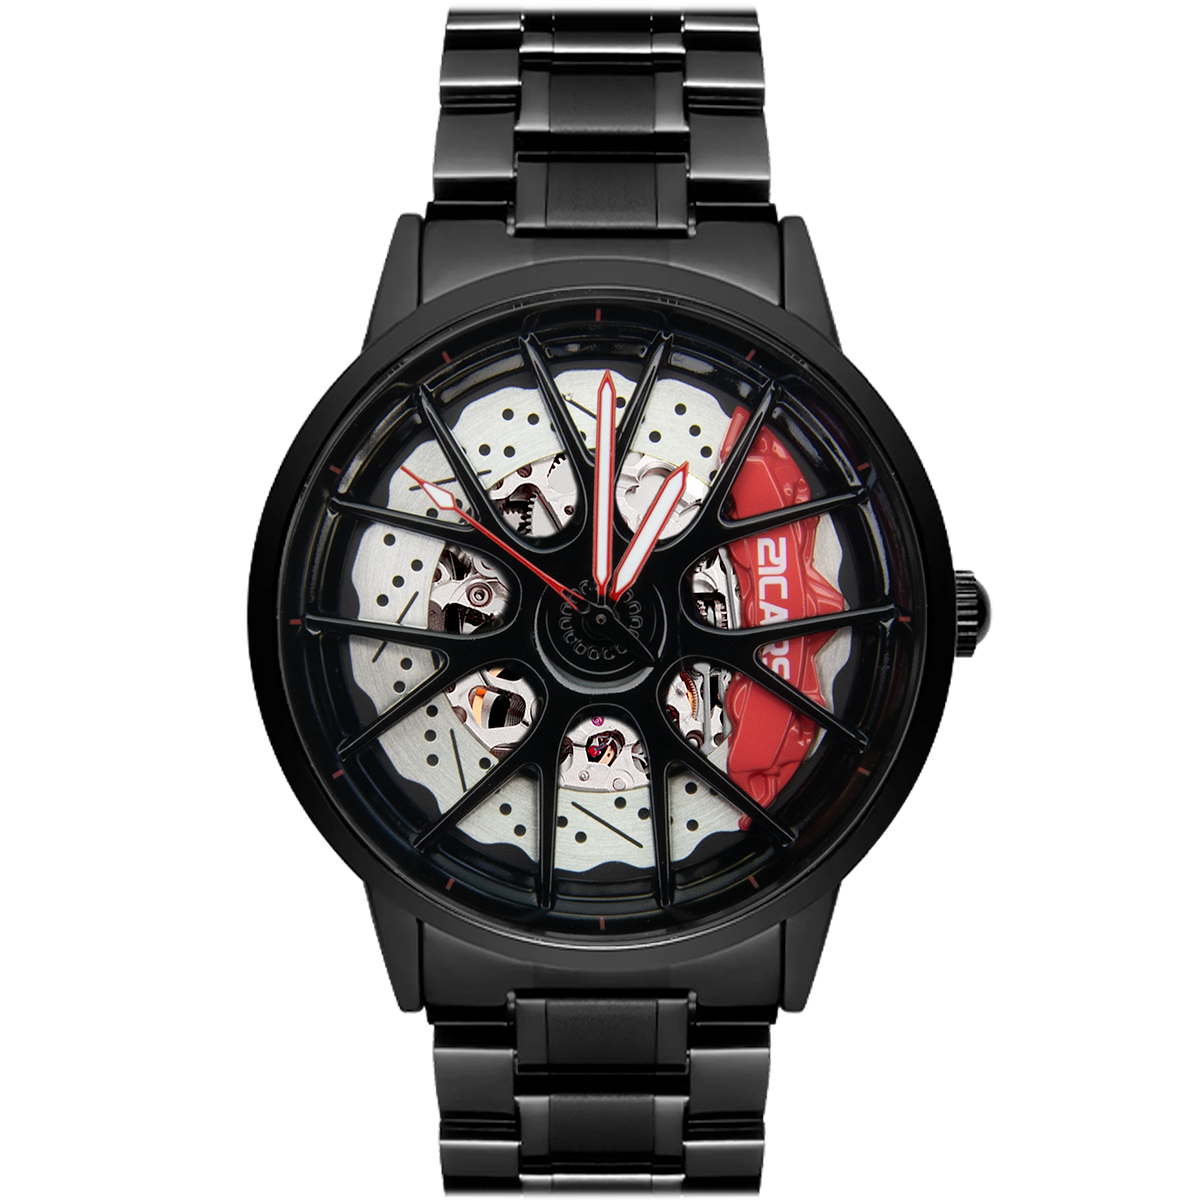 Trackmaster GT3 - Red/Black | Automatic | Non-Spin